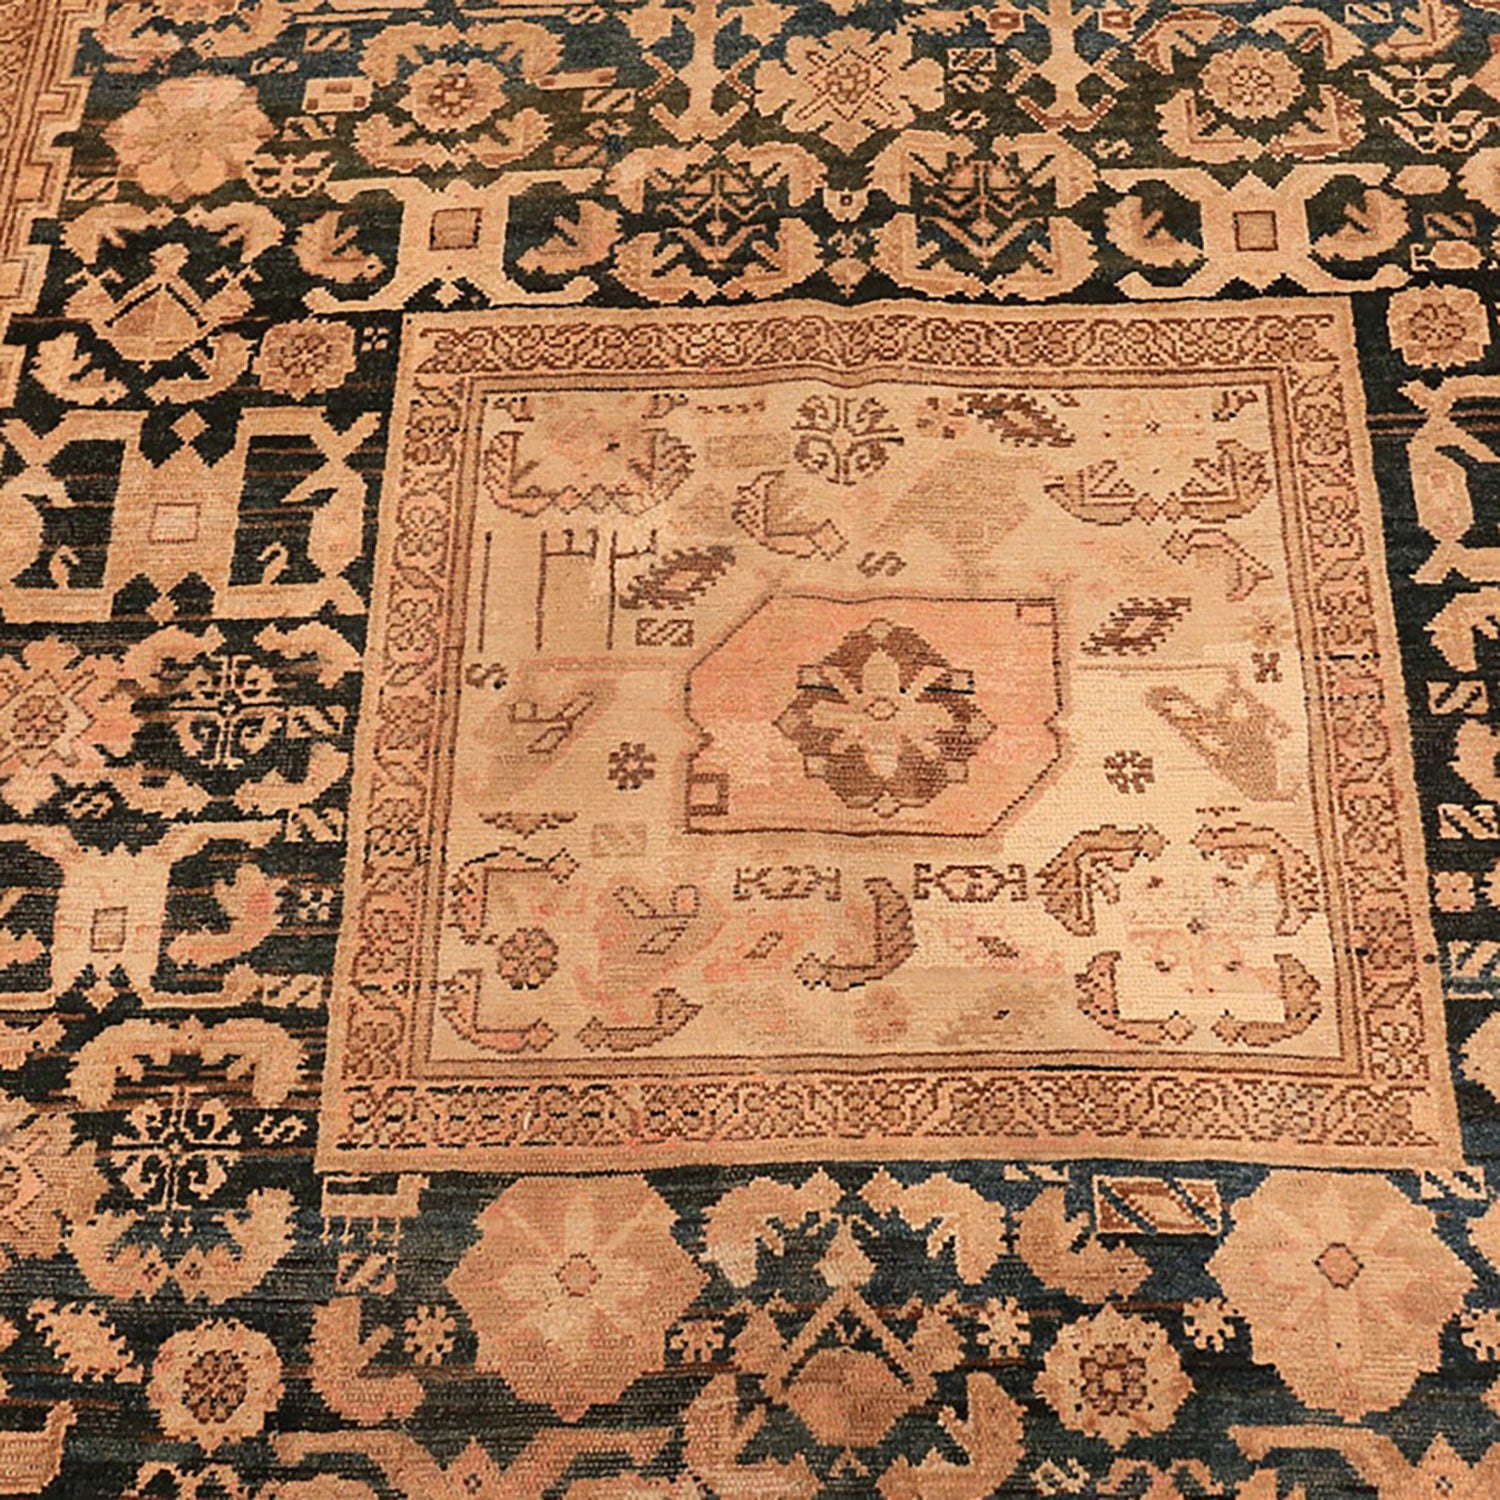 Ornate handwoven rug with intricate floral and geometric motifs